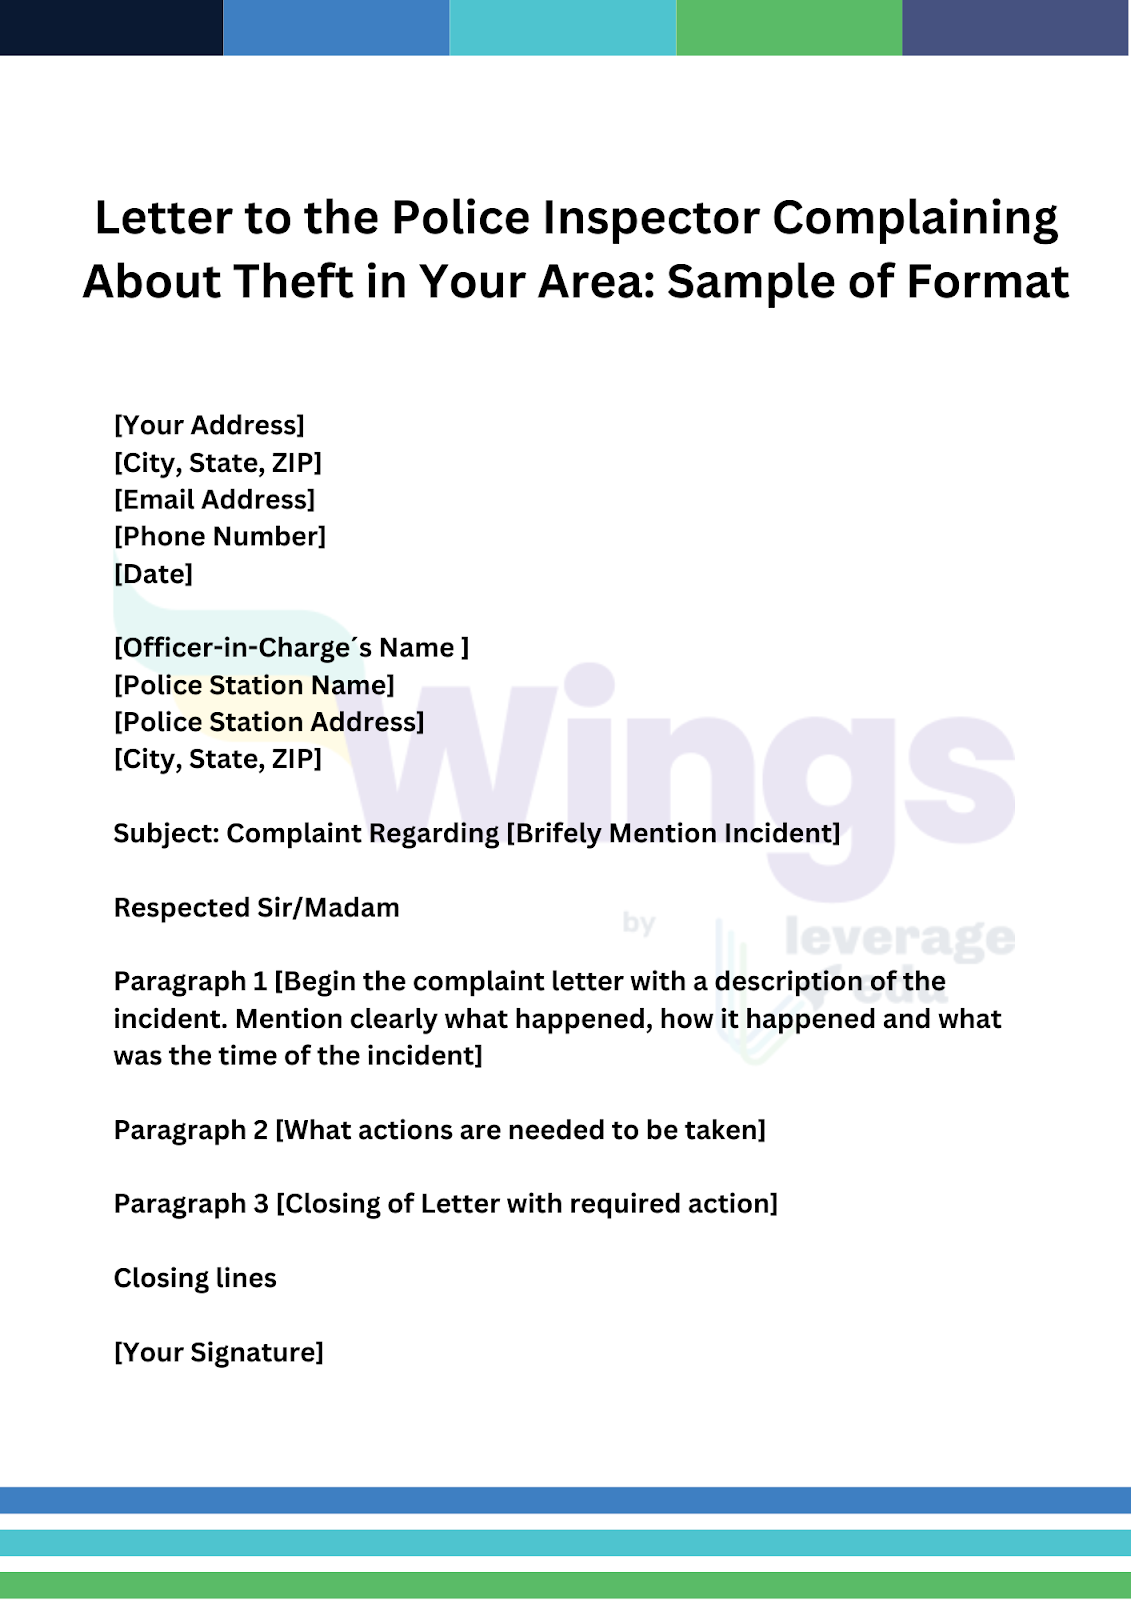 Write a Letter to the Police Inspector Complaining About Theft in Your Area
